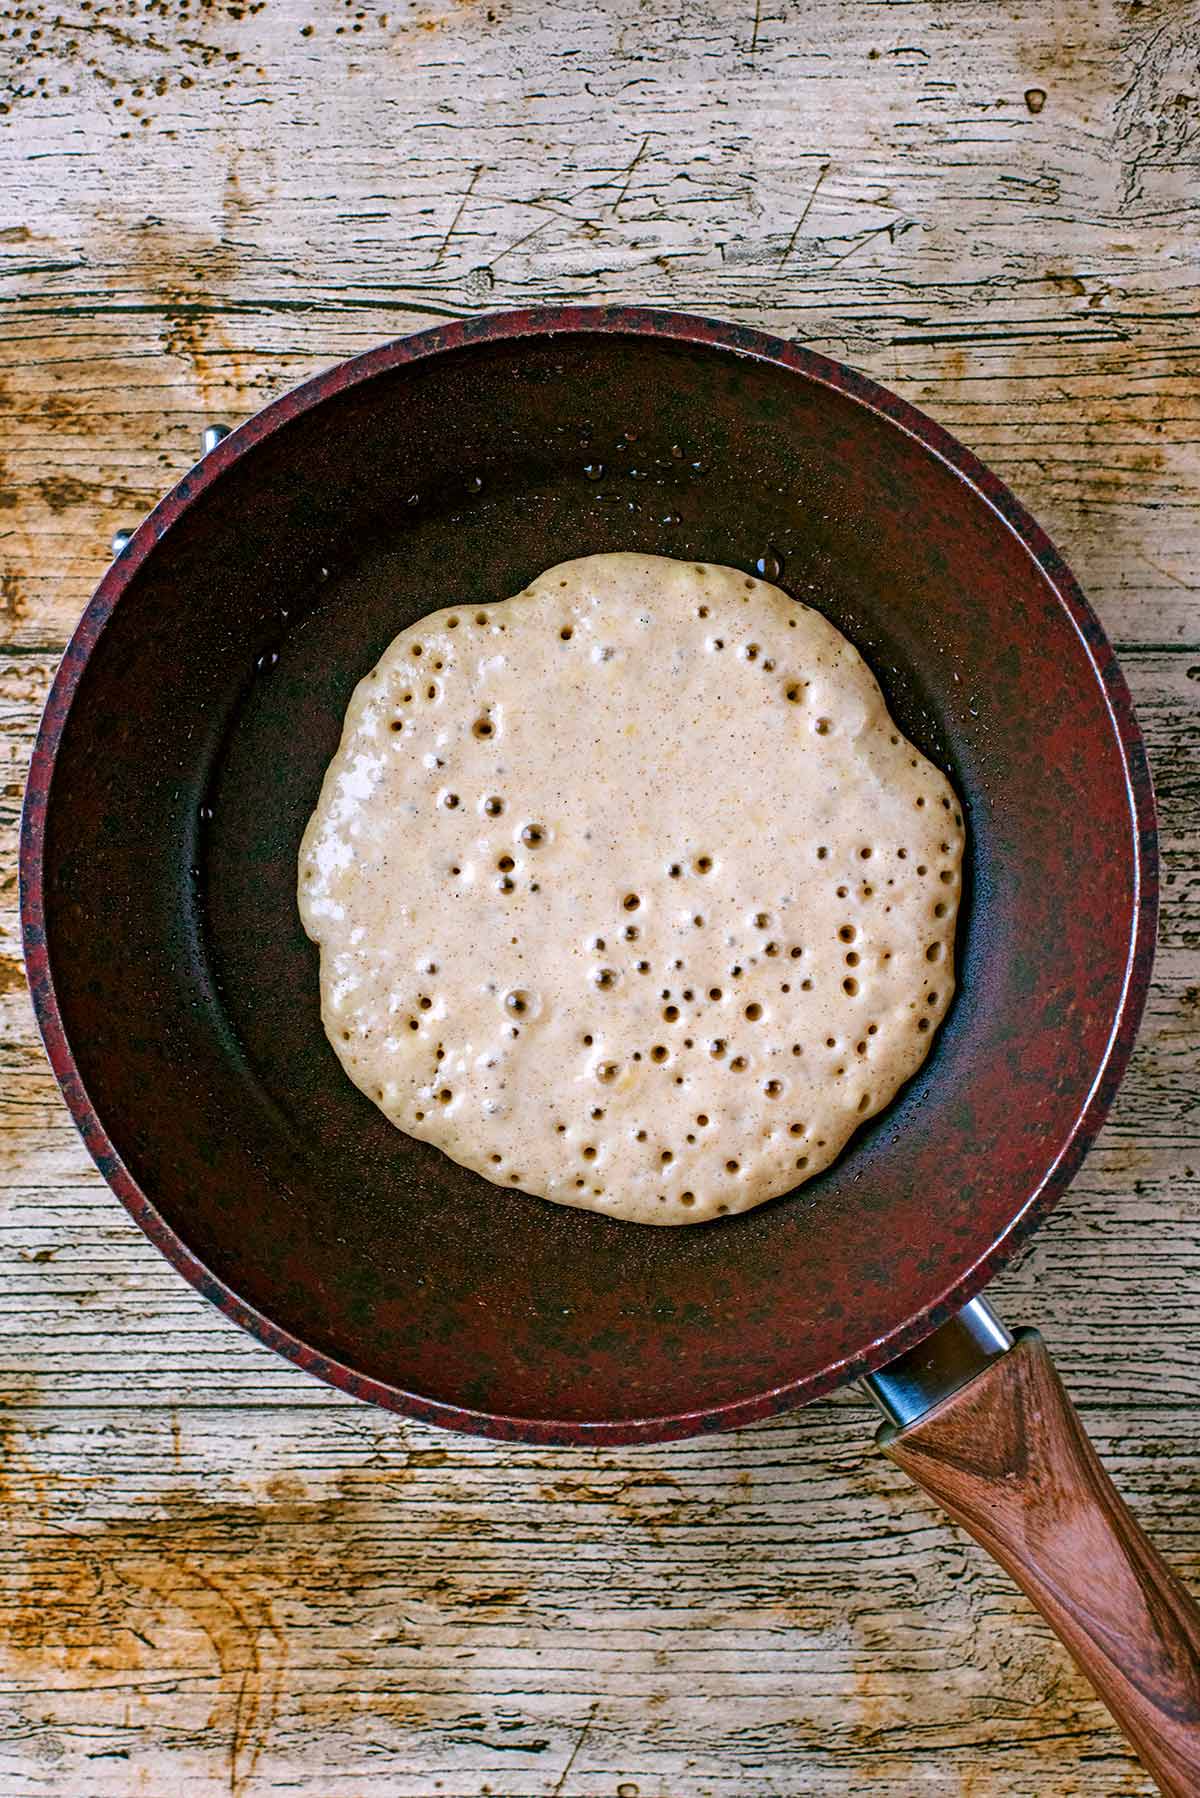 A frying pan with a half cooked pancake.